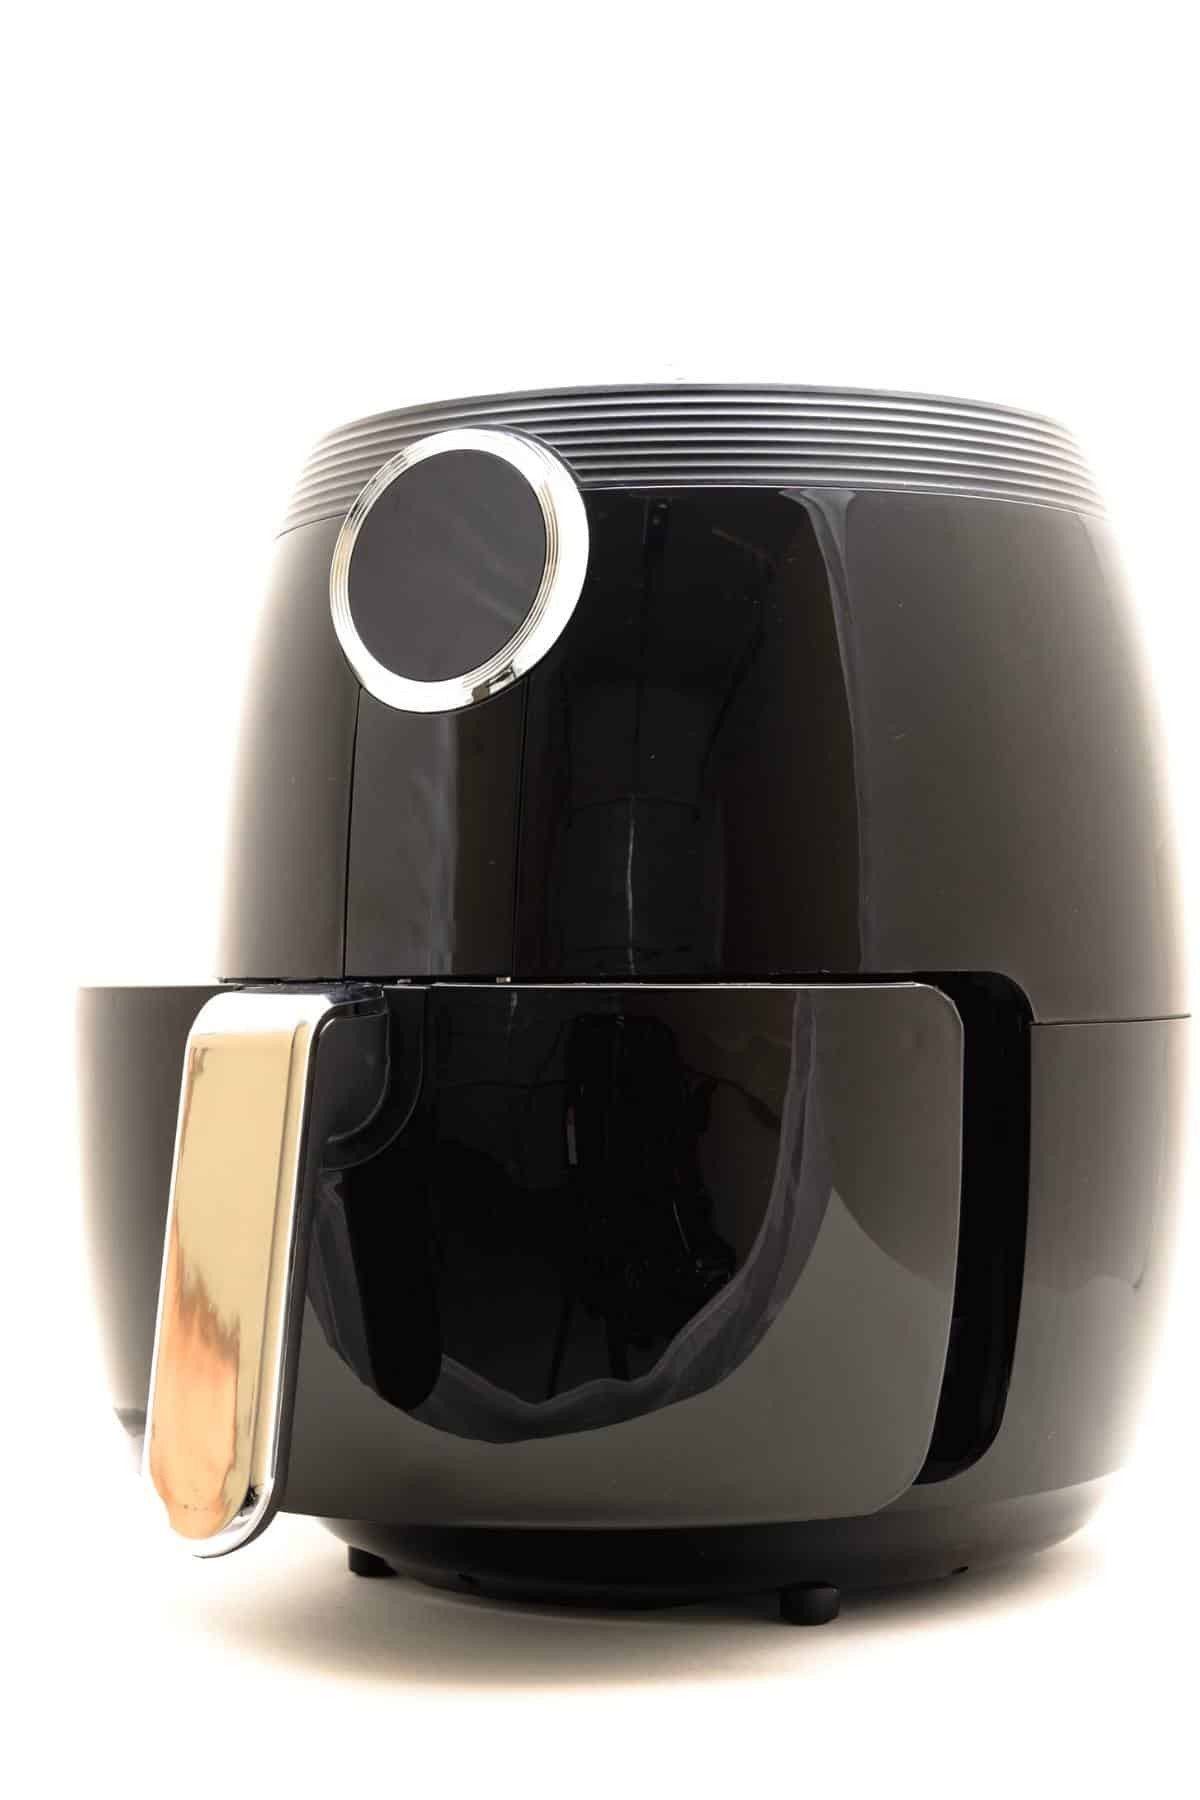 Black air fryer sitting on a counter.